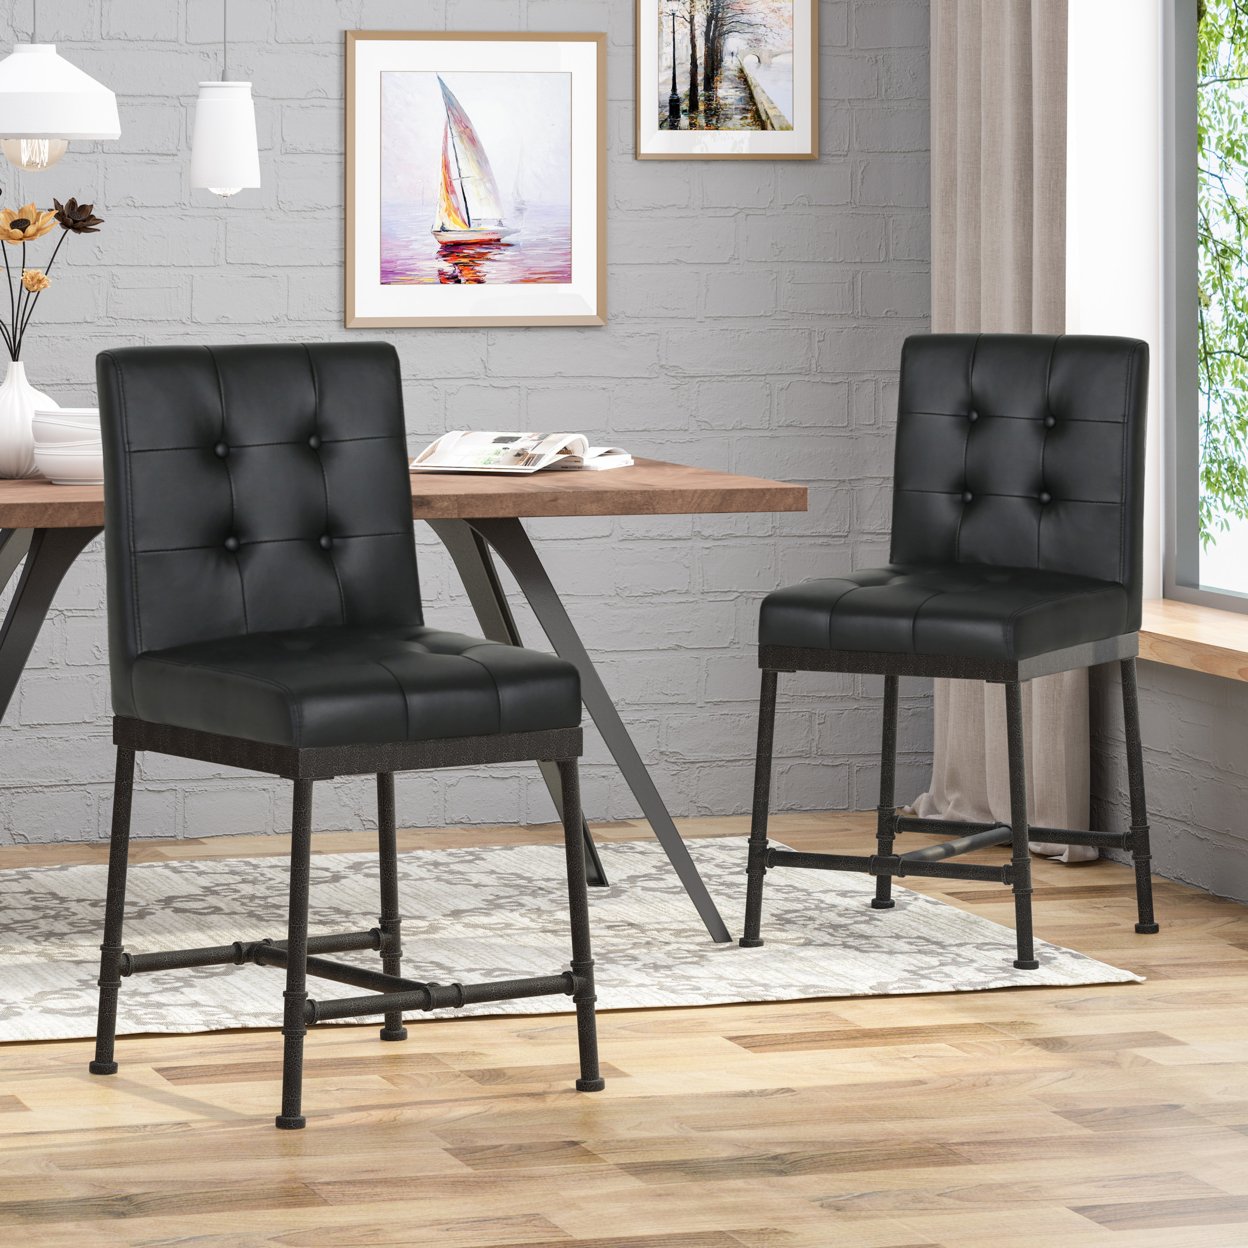 Savannah Industrial Modern 24 Counter Stool With Faux Leather Backing And Metal Pipe Base (Set Of 2) - Black + Black